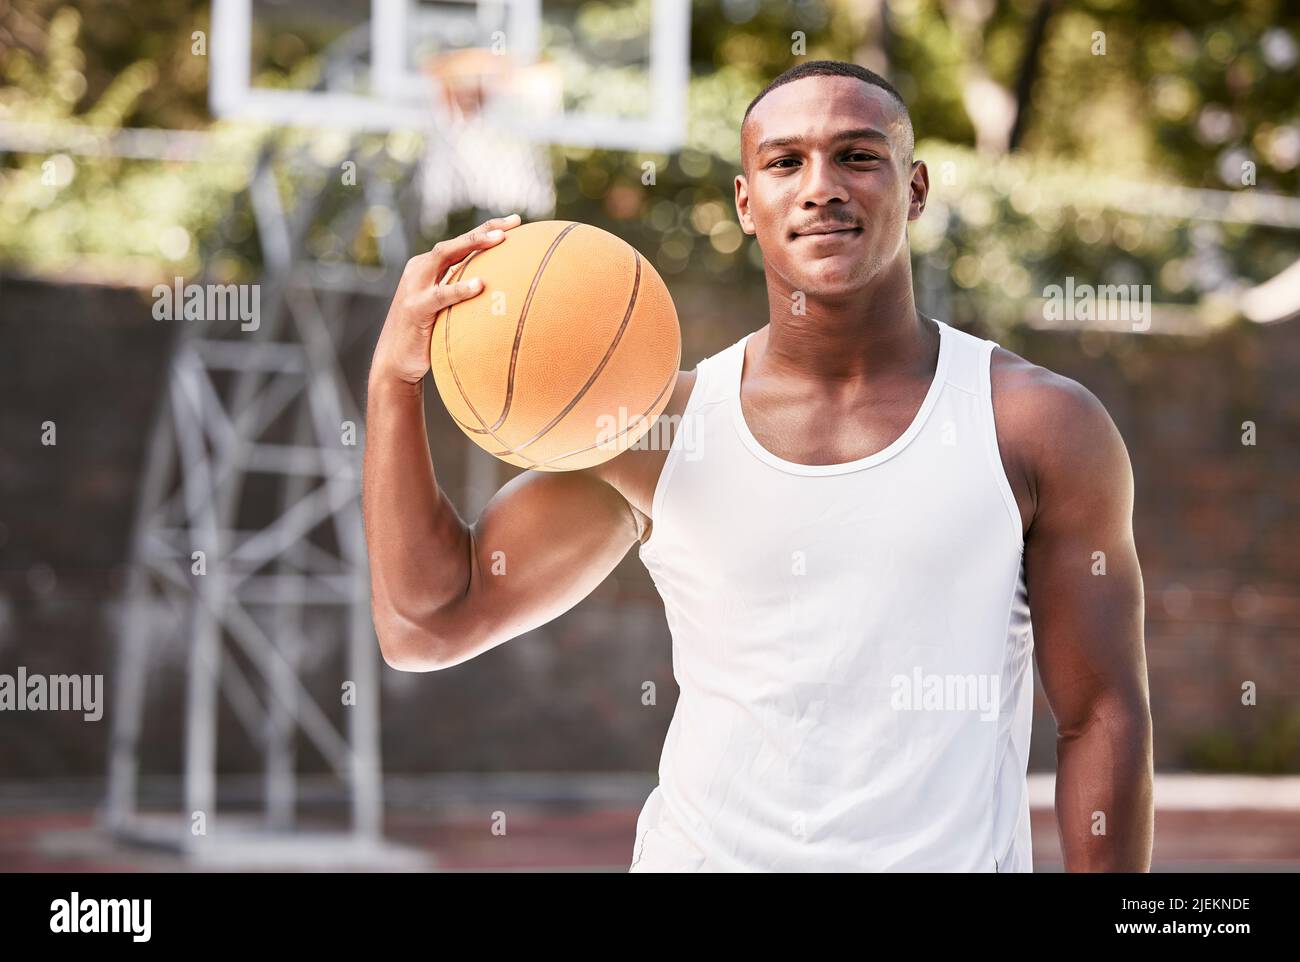 Portrait of a young black male basketball player holding a ball, playing a match on a local sports court outside. One cool muscular man with attitude Stock Photo